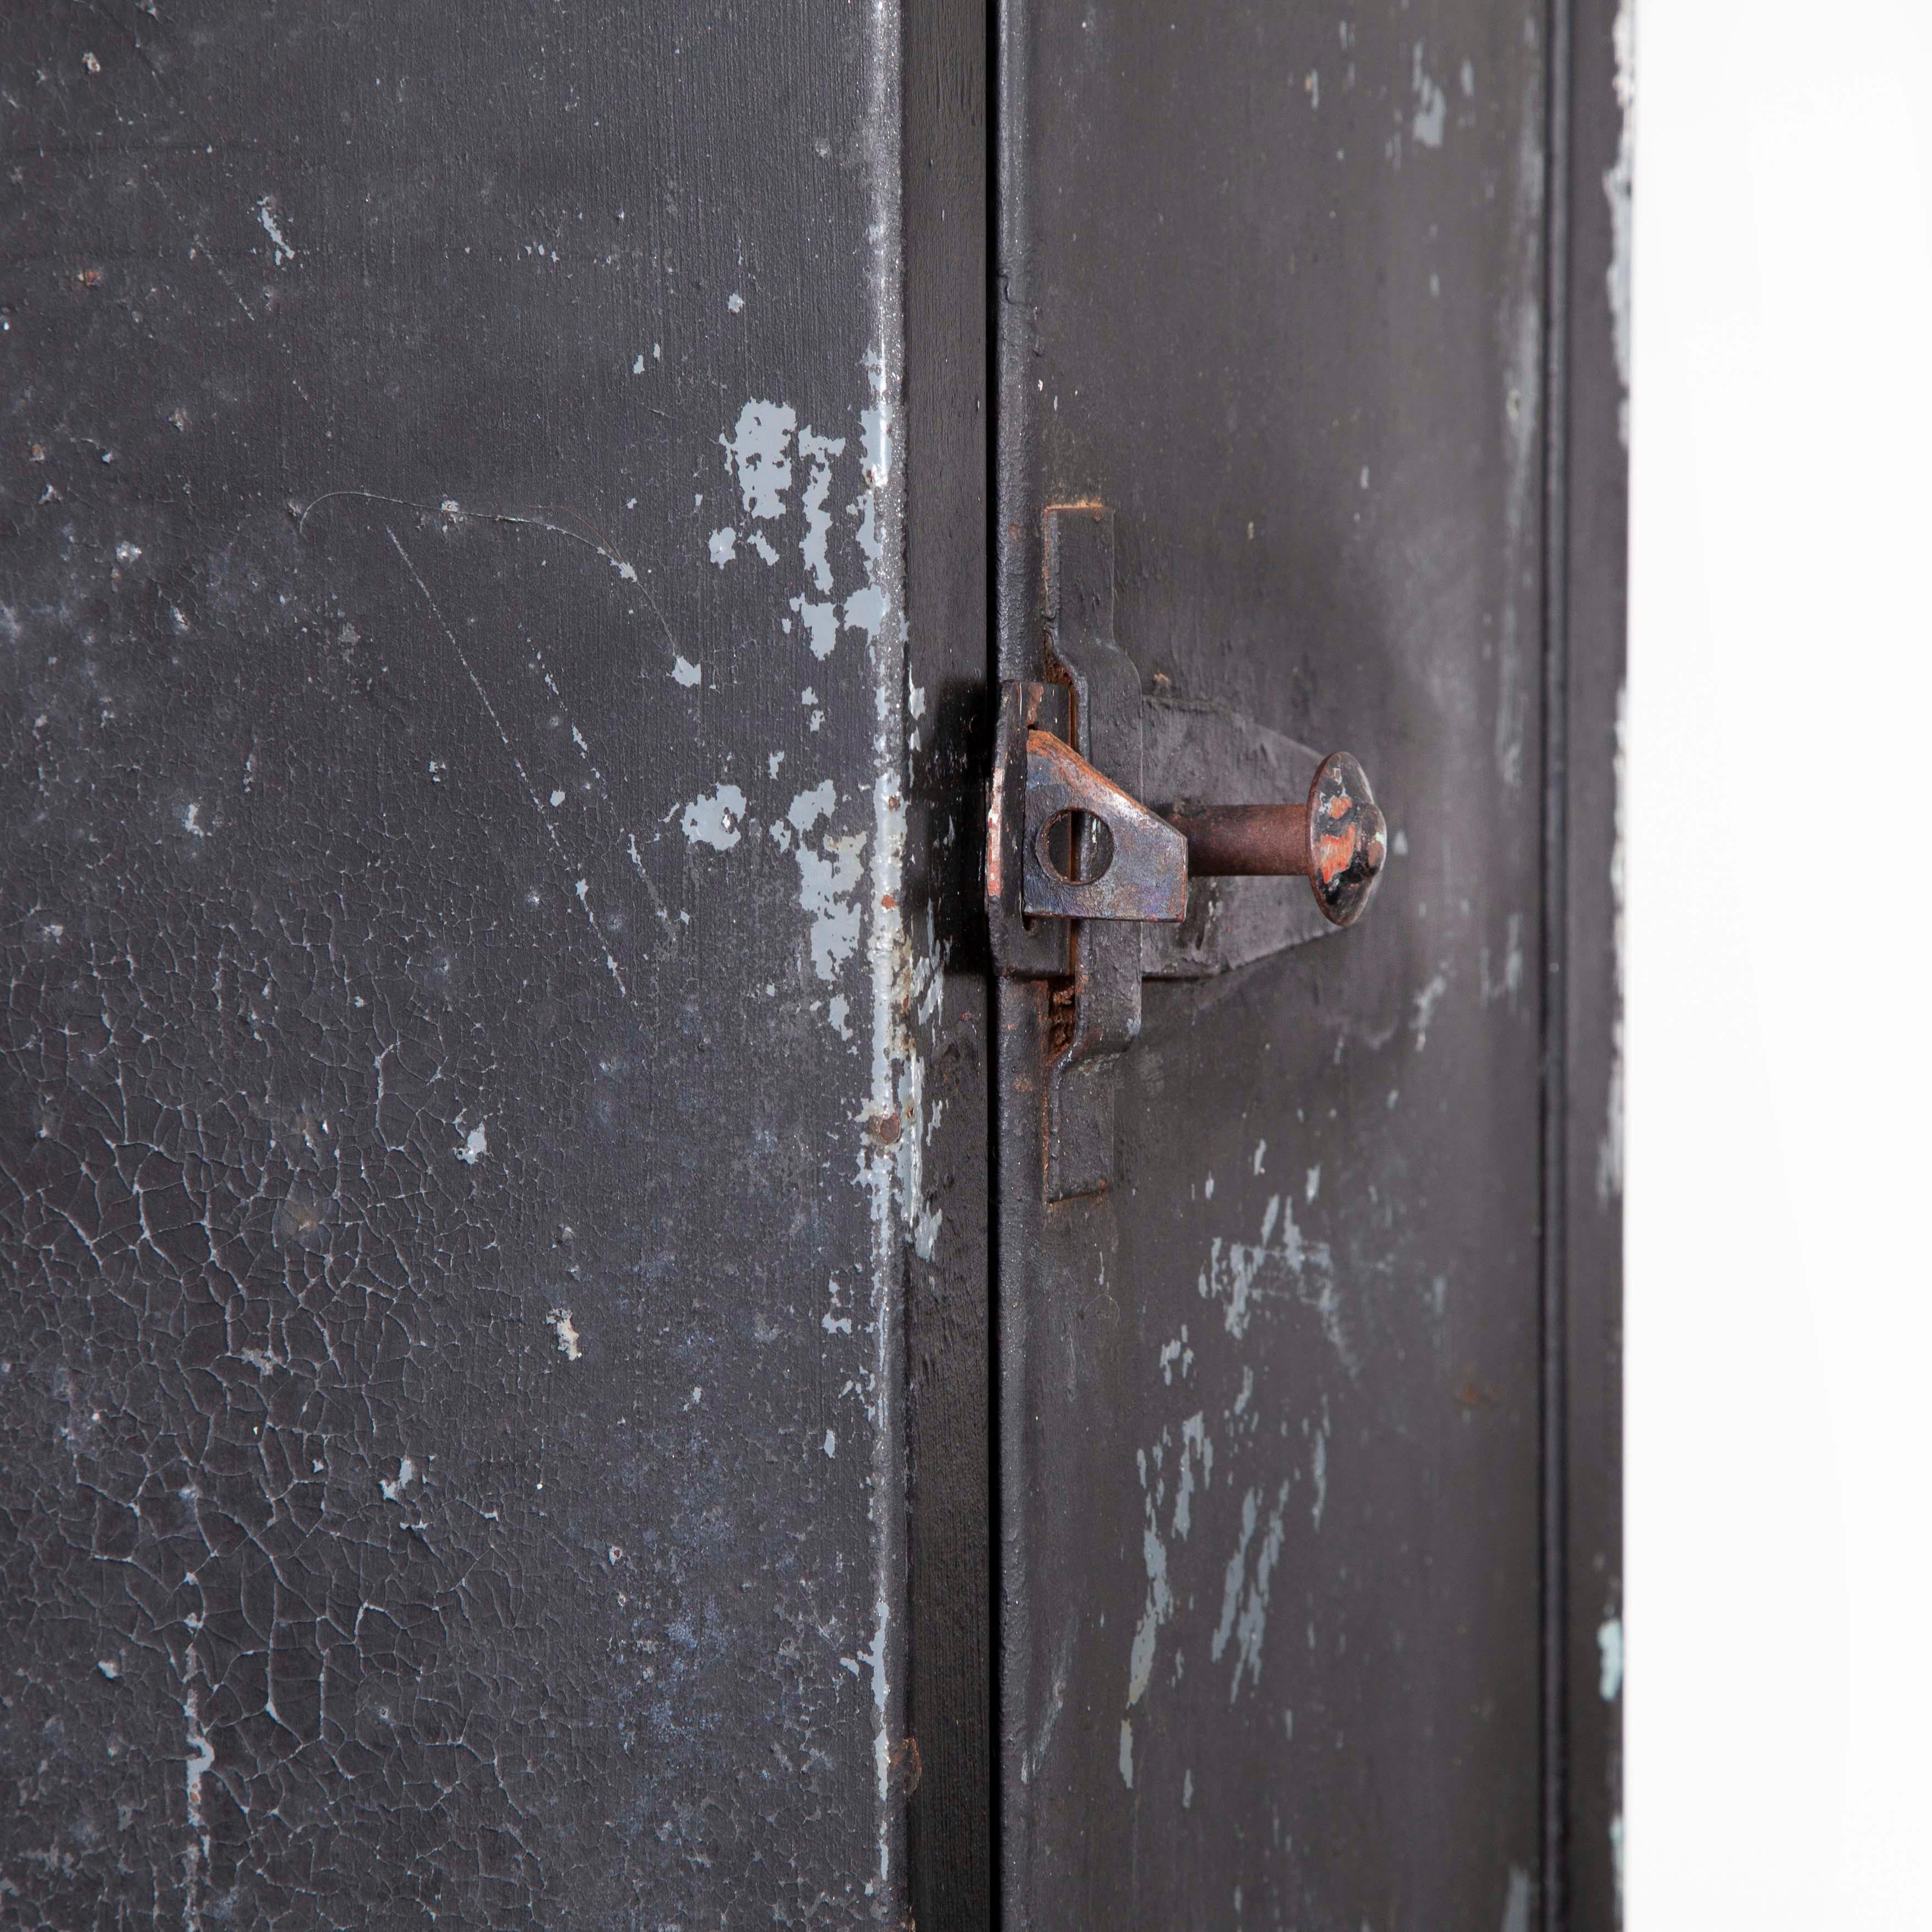 1950s single industrial metal locker, matte black
1950s single industrial metal locker, matte black. We have always had a soft spot for a good locker. Single ones are just a very practical shape and size and can be tucked into a corner and used for